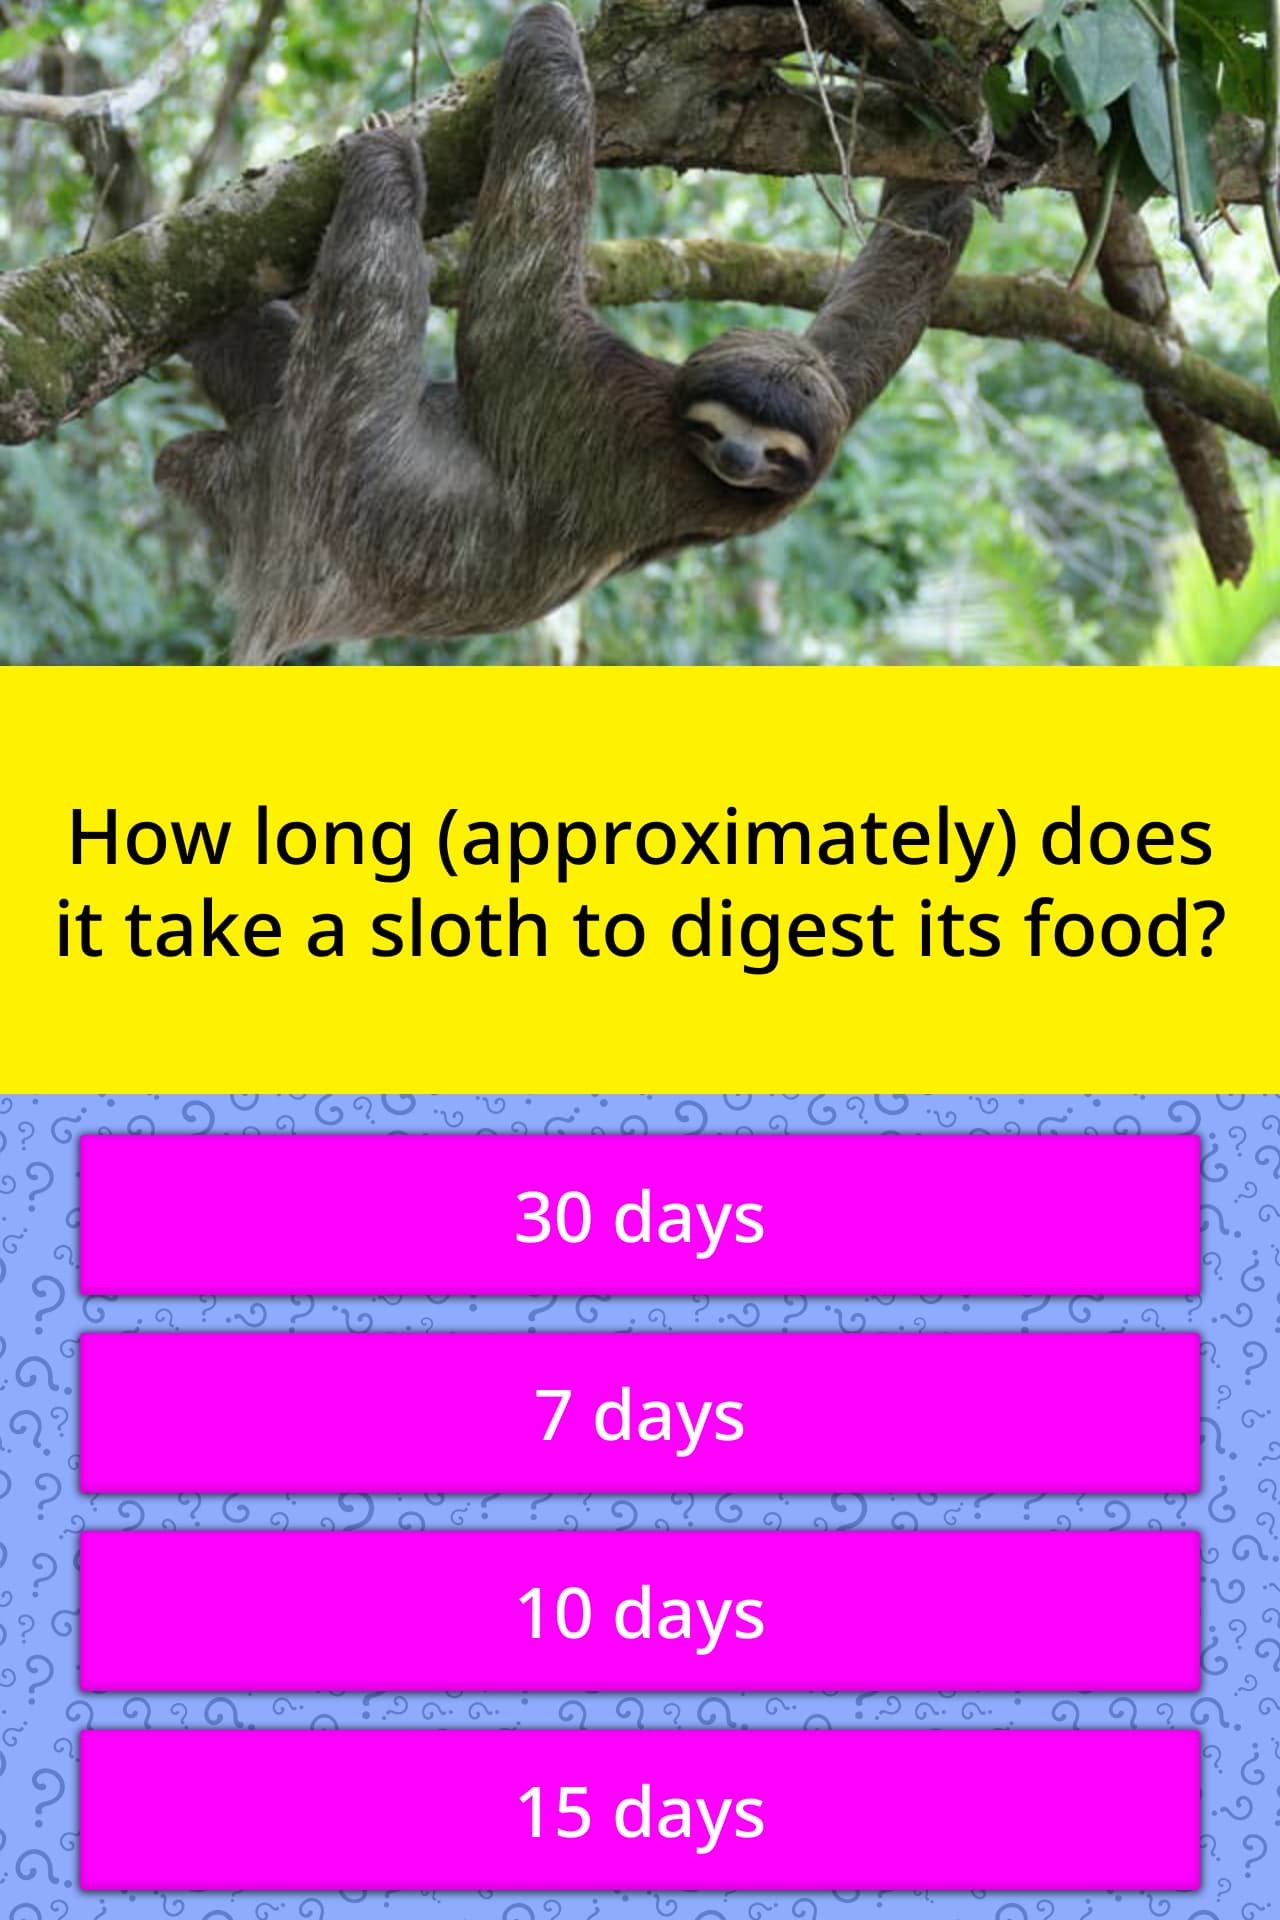 How long does it take a sloth to digest?